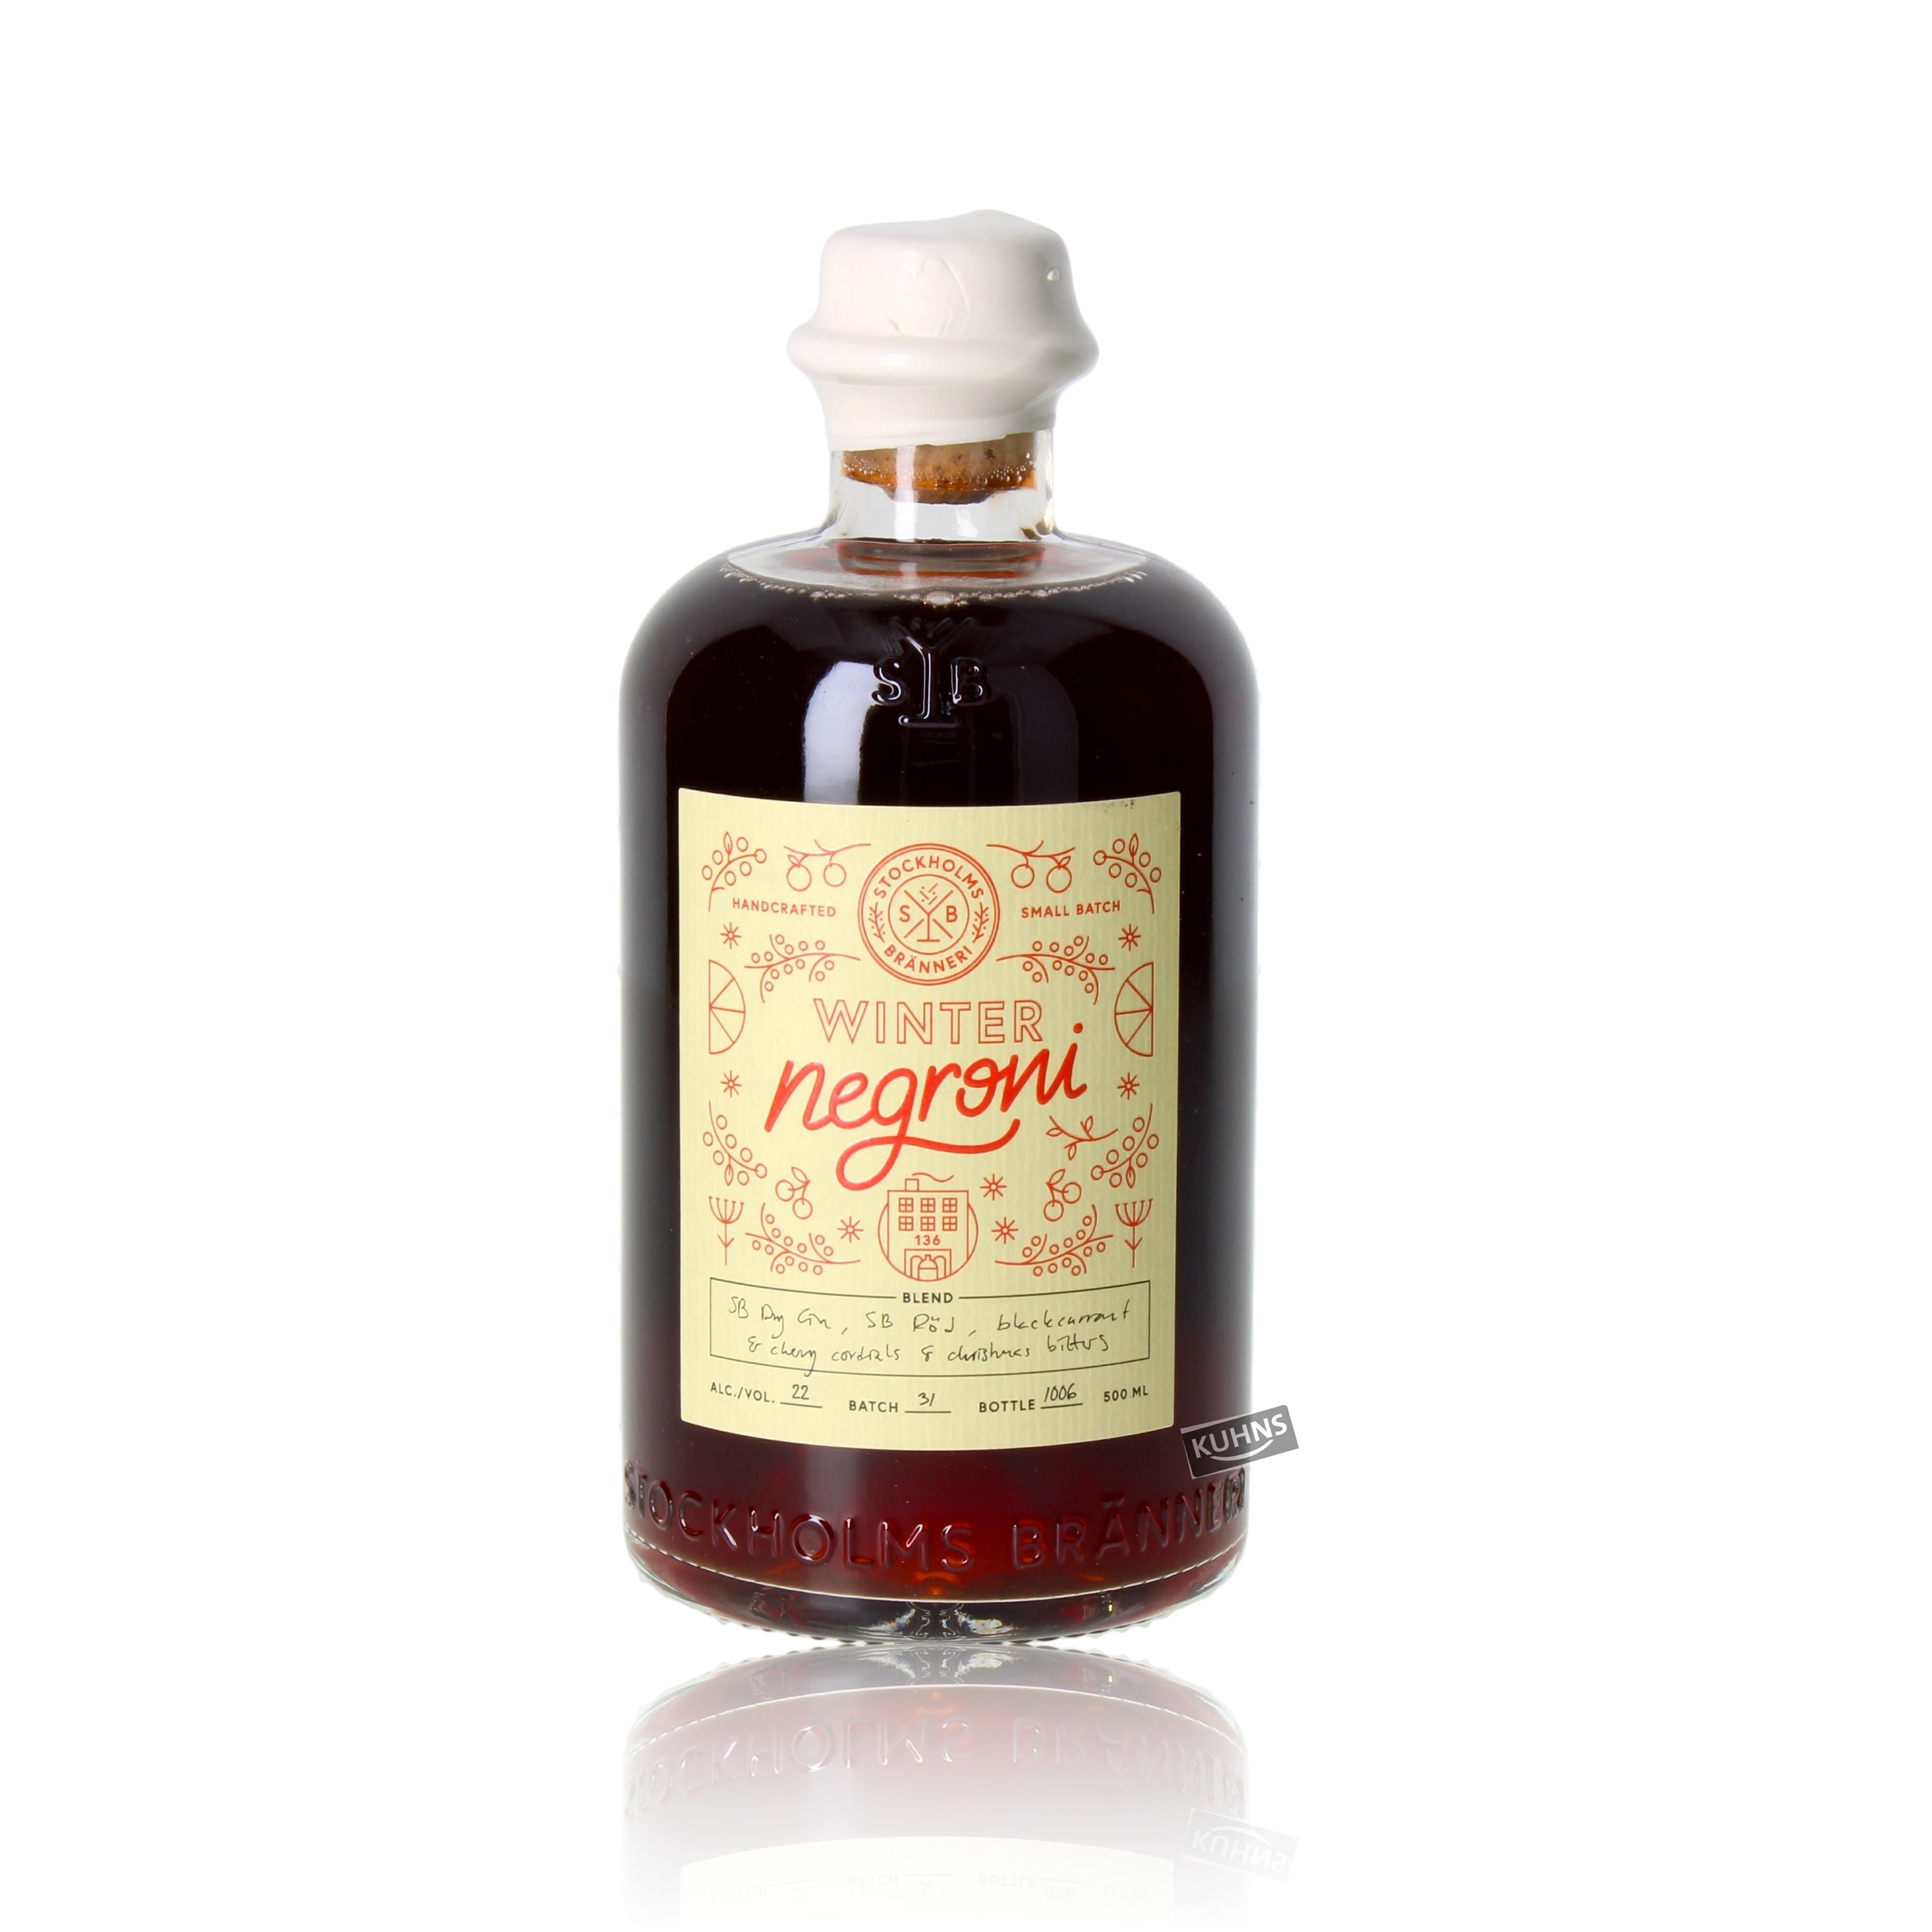 Stockholm's distillery - Negroni Winter Edition 0.5l, alc. 22% by volume,